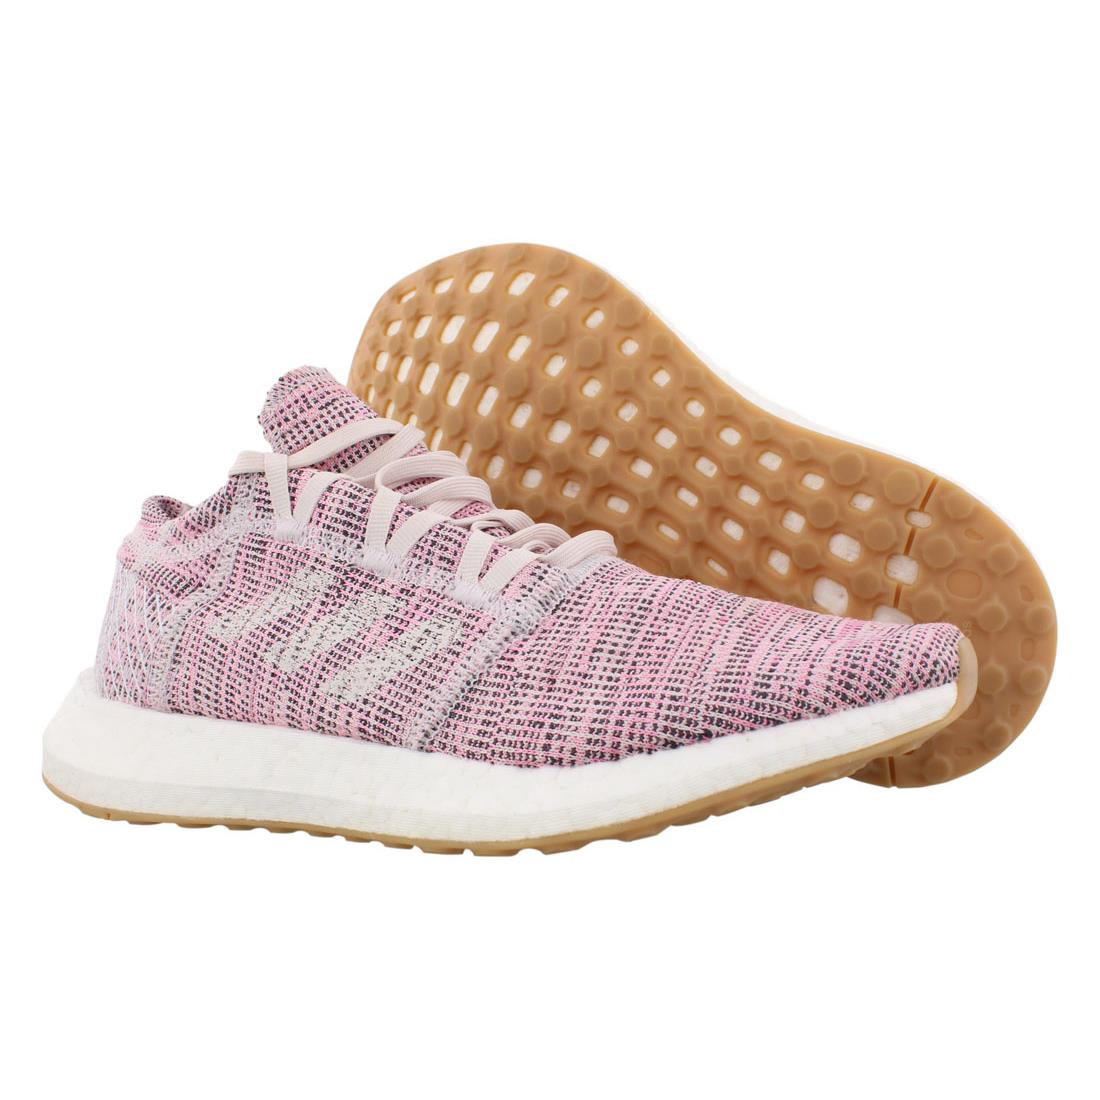 Adidas Pureboost Go Womens Shoes Synthetic